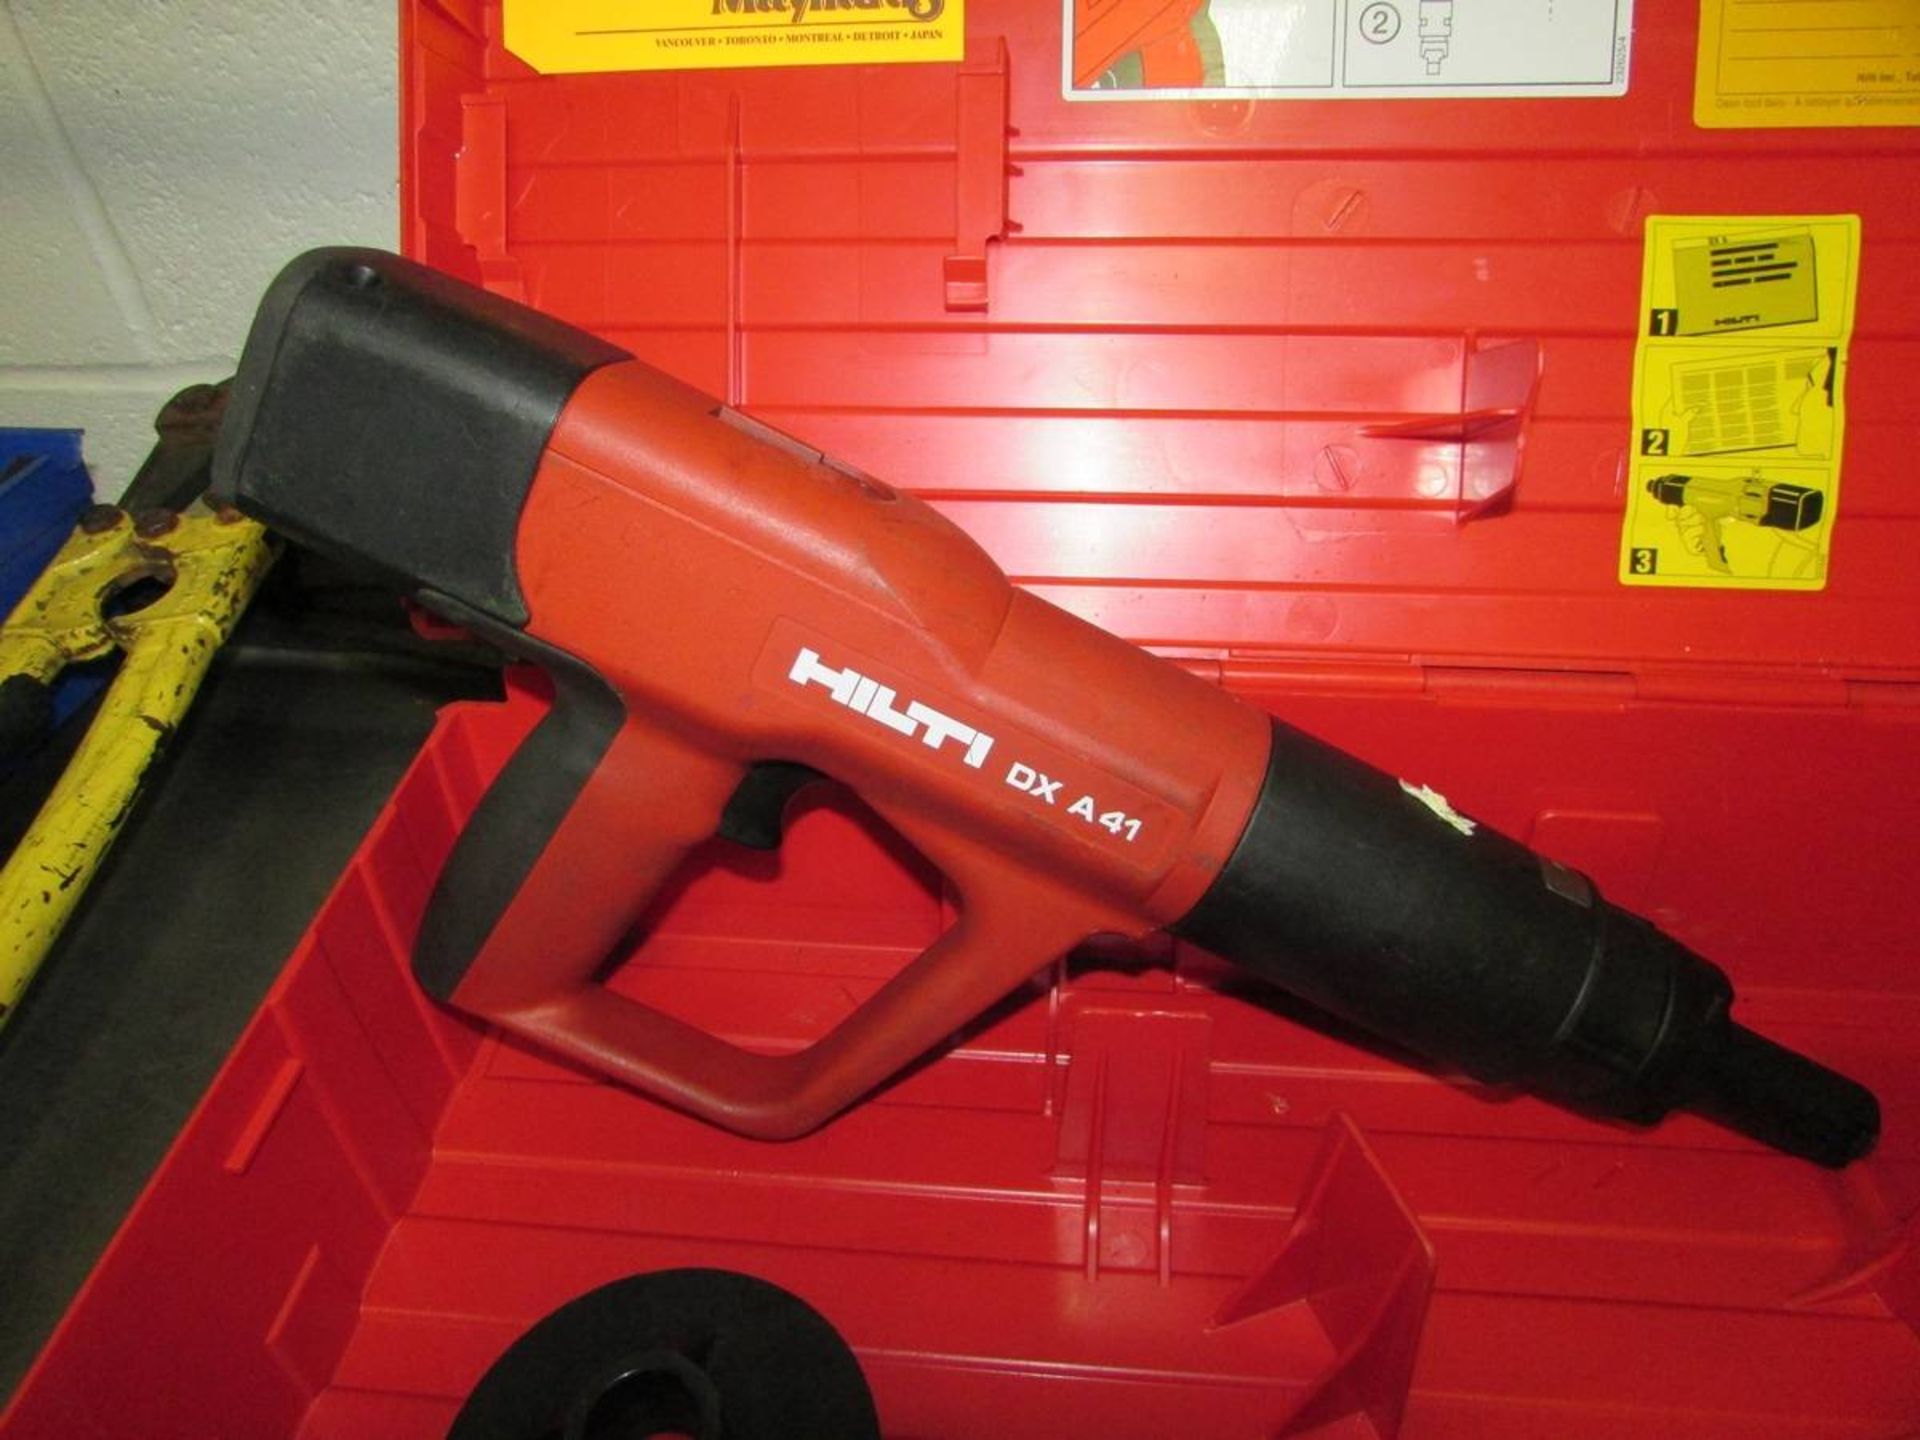 Hilti DXA41 Powder Actuated Fastening Tool - Image 3 of 3